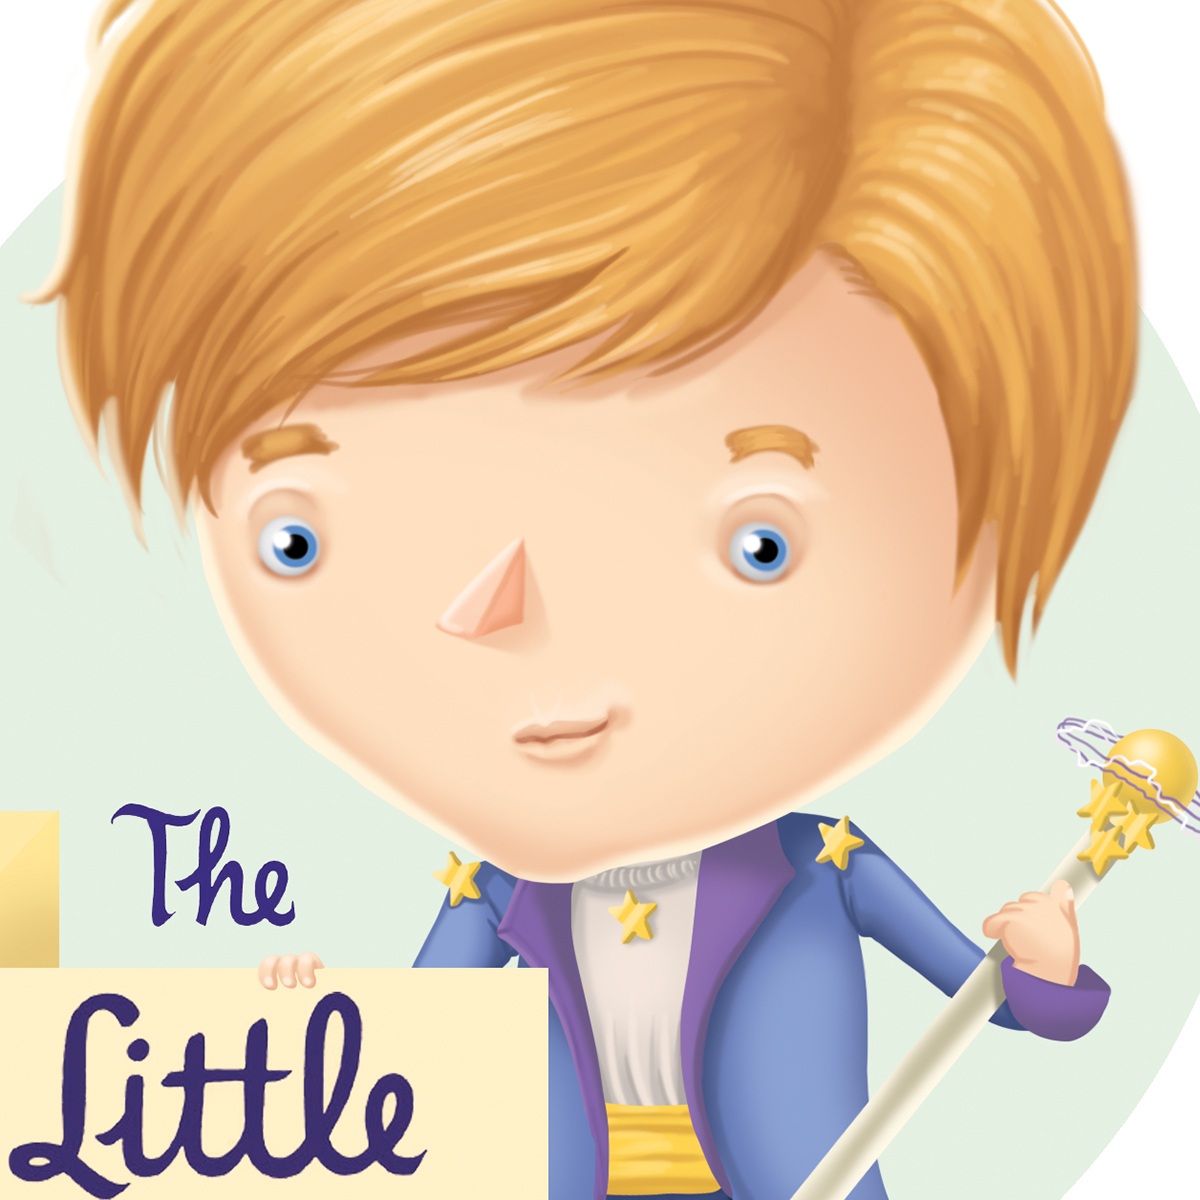 little prince Character photoshop  book cover